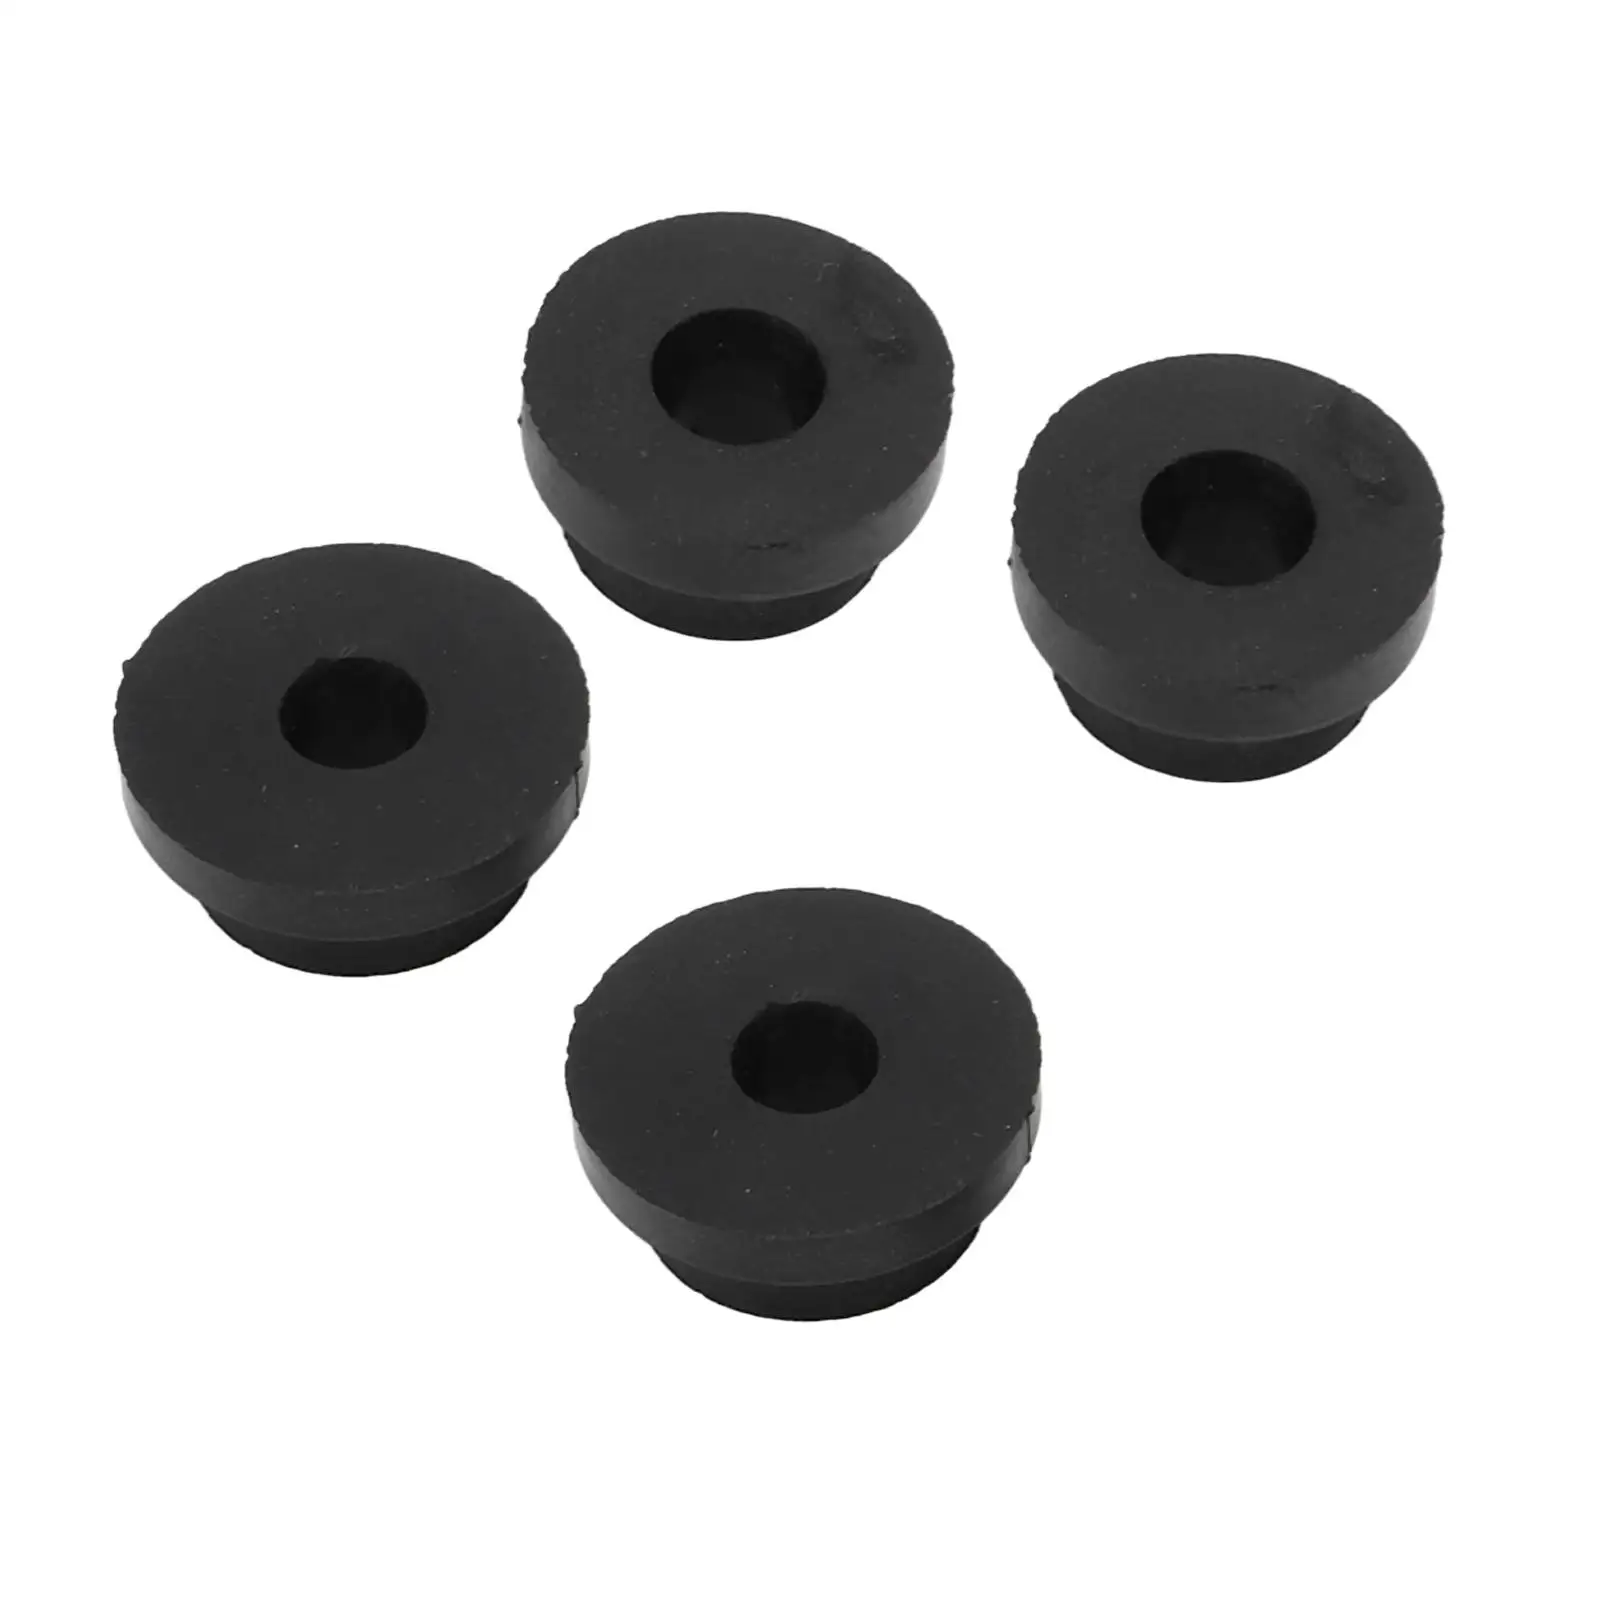 4x Black Radiator Mounting Rubber Grommets Replacement Assembly Spare Parts Accessories 572312 for Land Rover Discovery 1